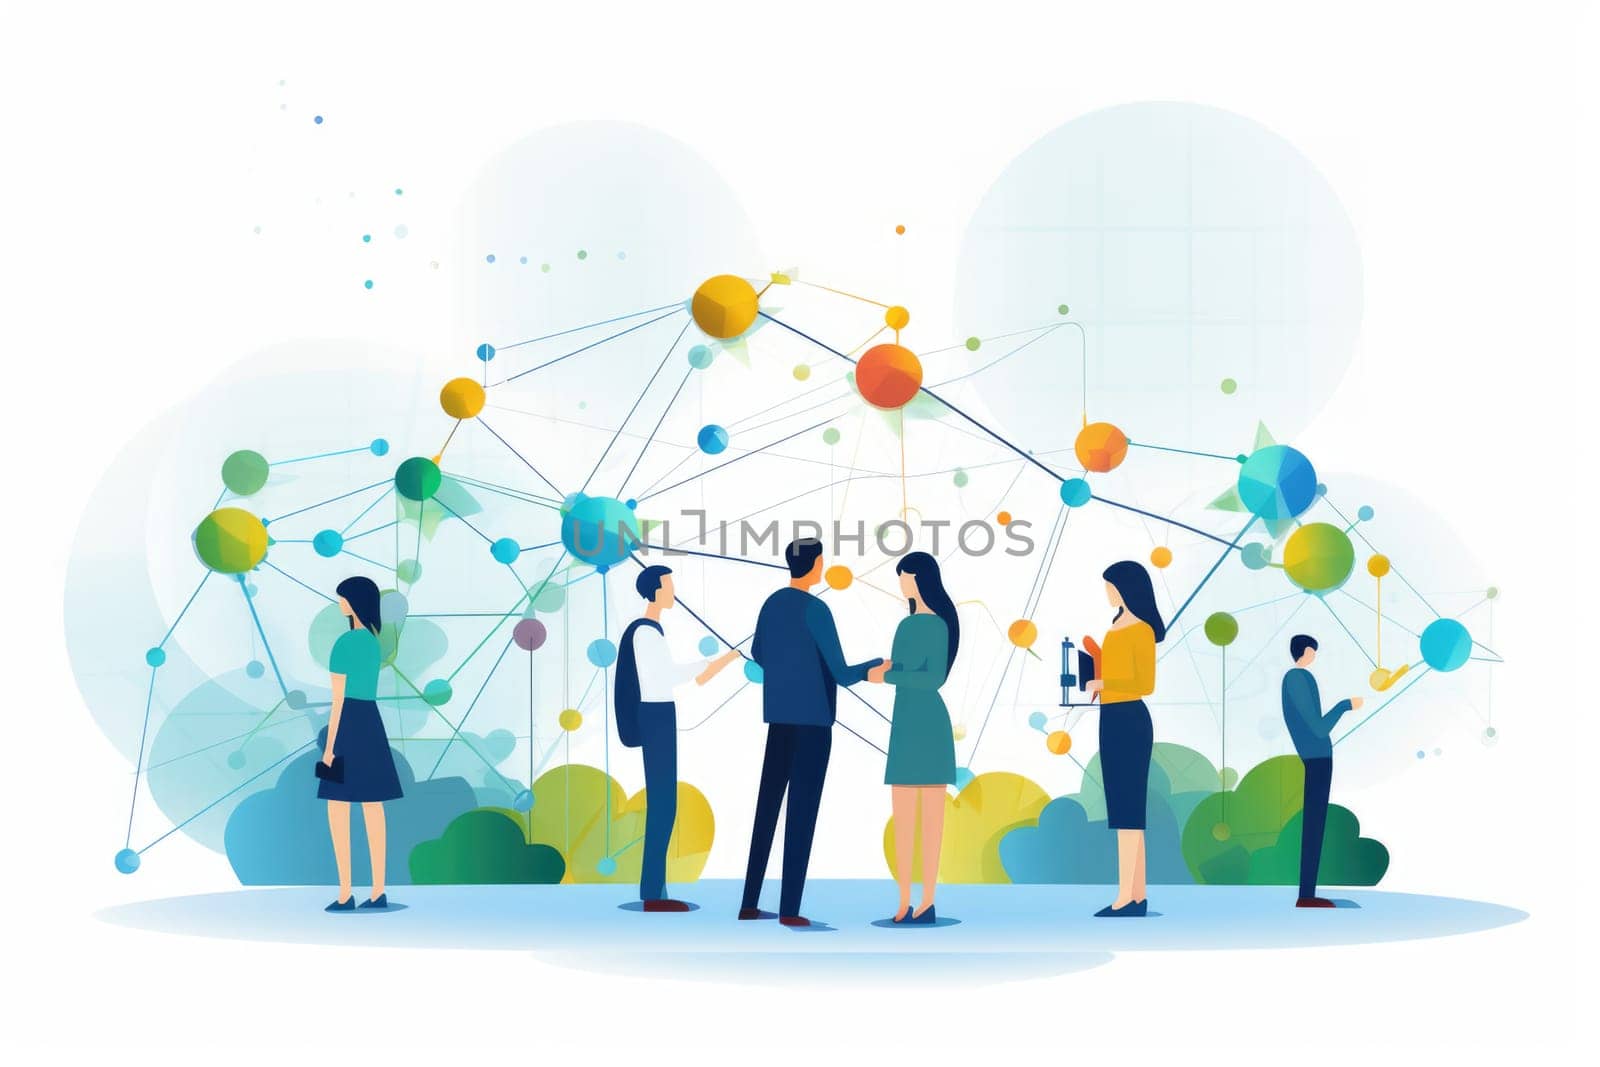 Networking building relationships cartoon illustration - AI generated. Network, colorful, spheres, people.